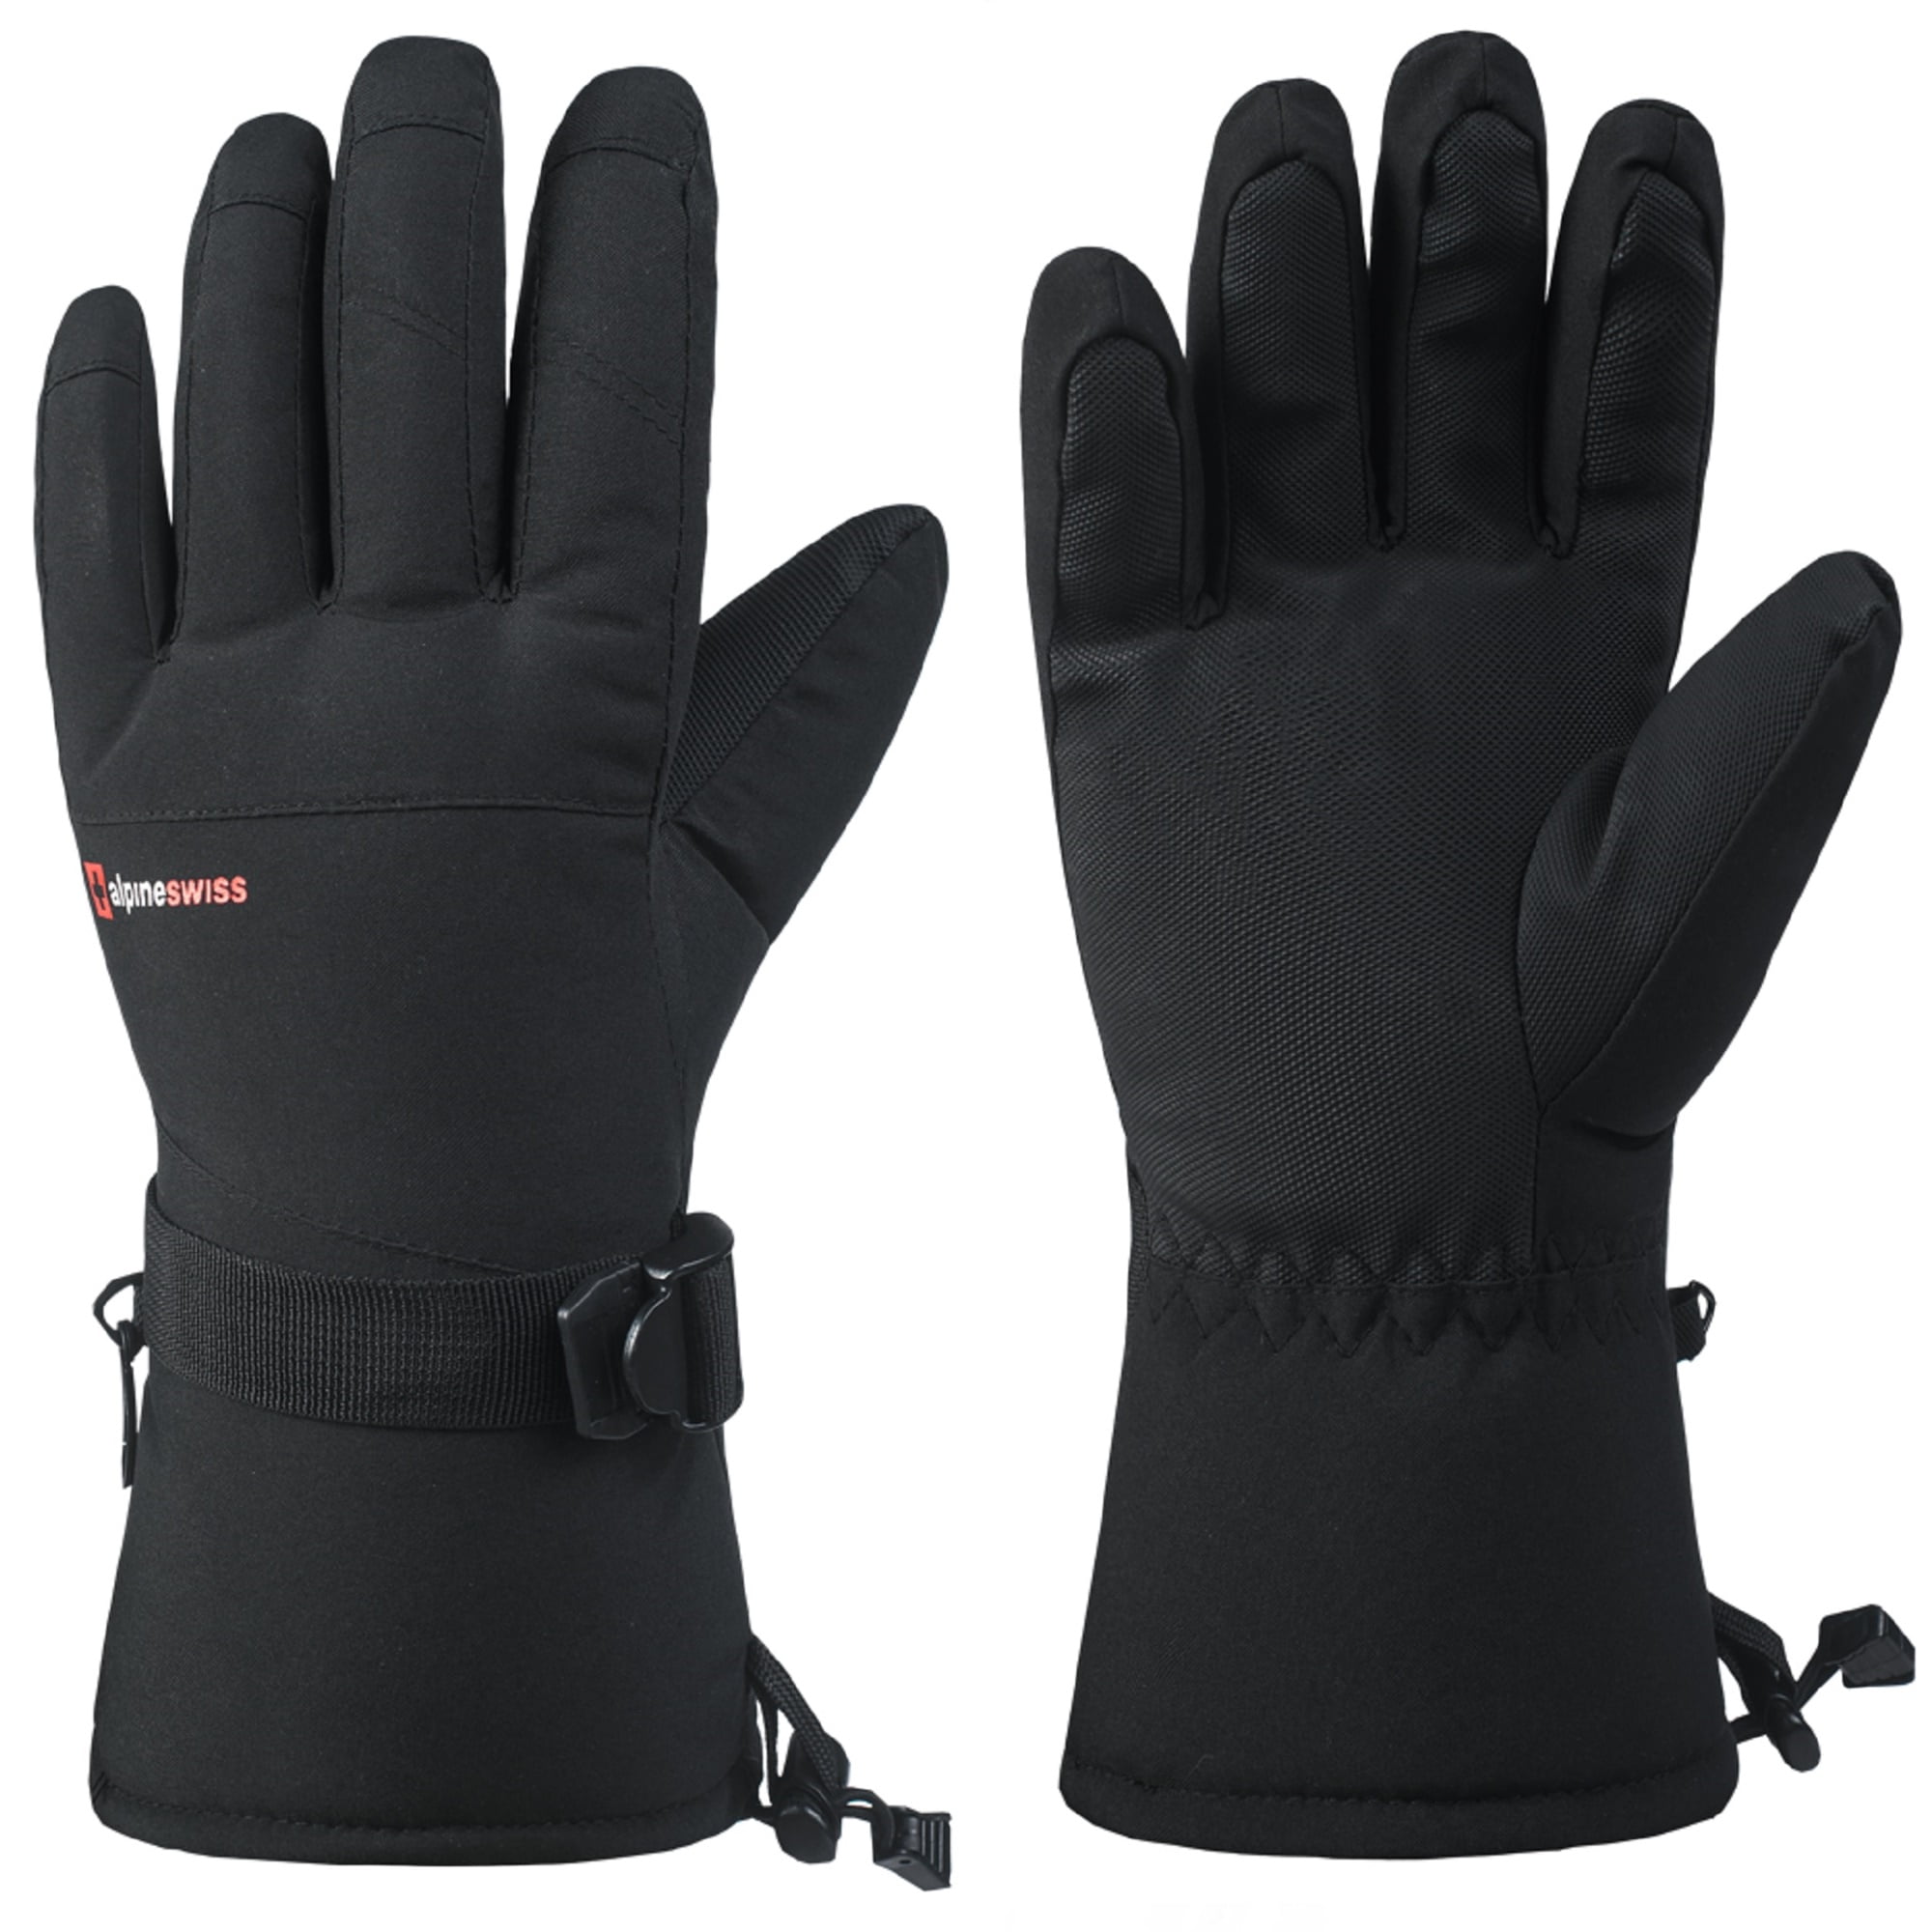 NEW THERMAL INSULATION WINTER WARM SKI GLOVES LINING WATERPROOF HEATED COLD 